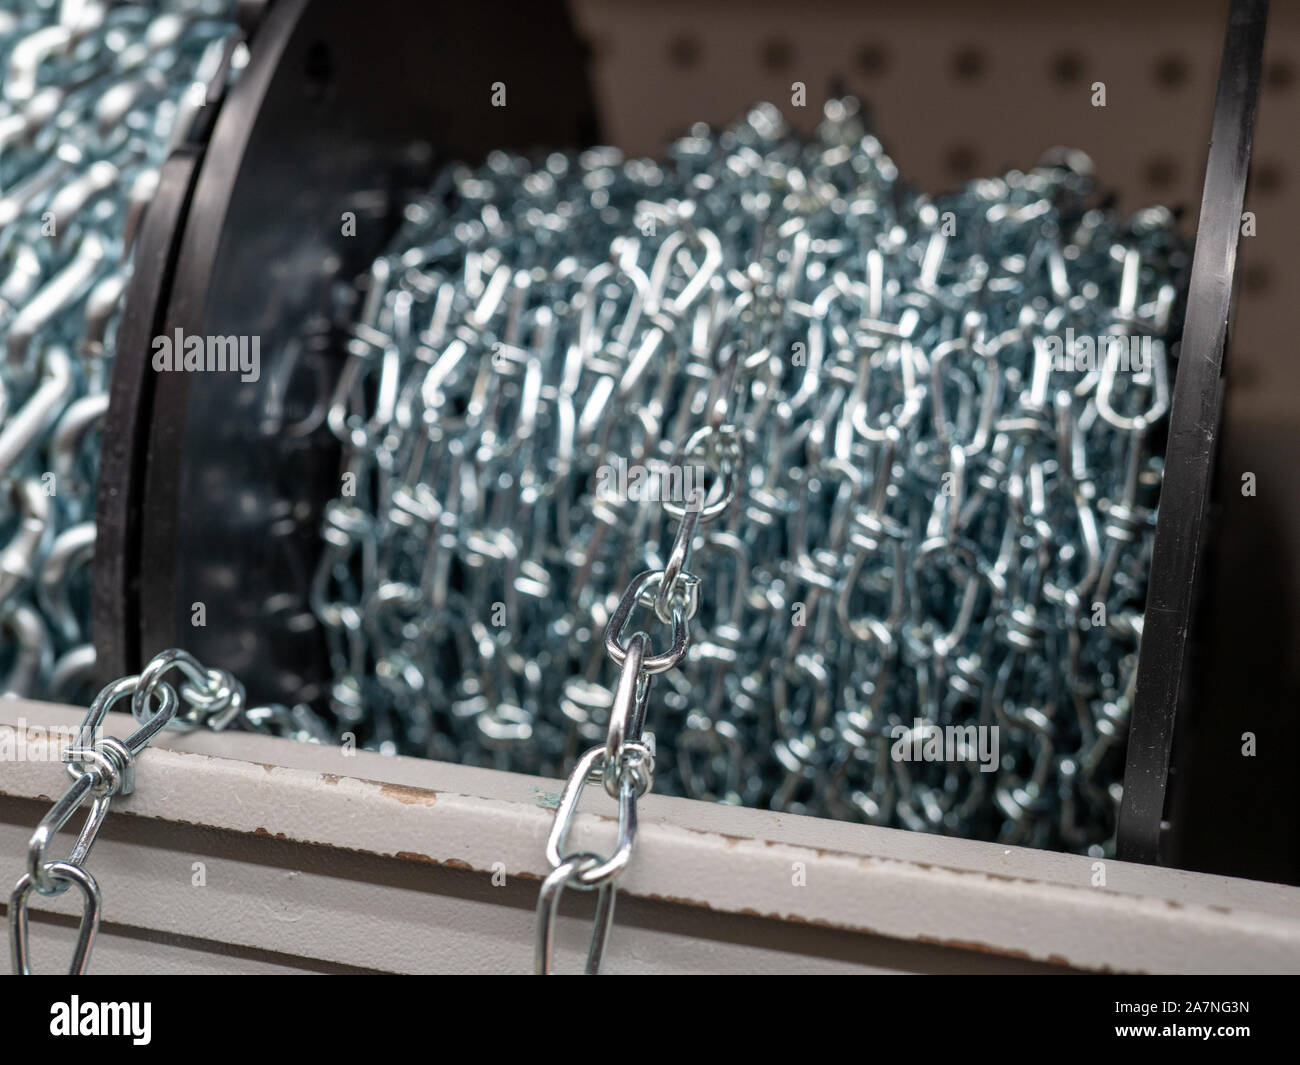 Roll of steel chain sitting in indoors storage area rolled up and spooled Stock Photo